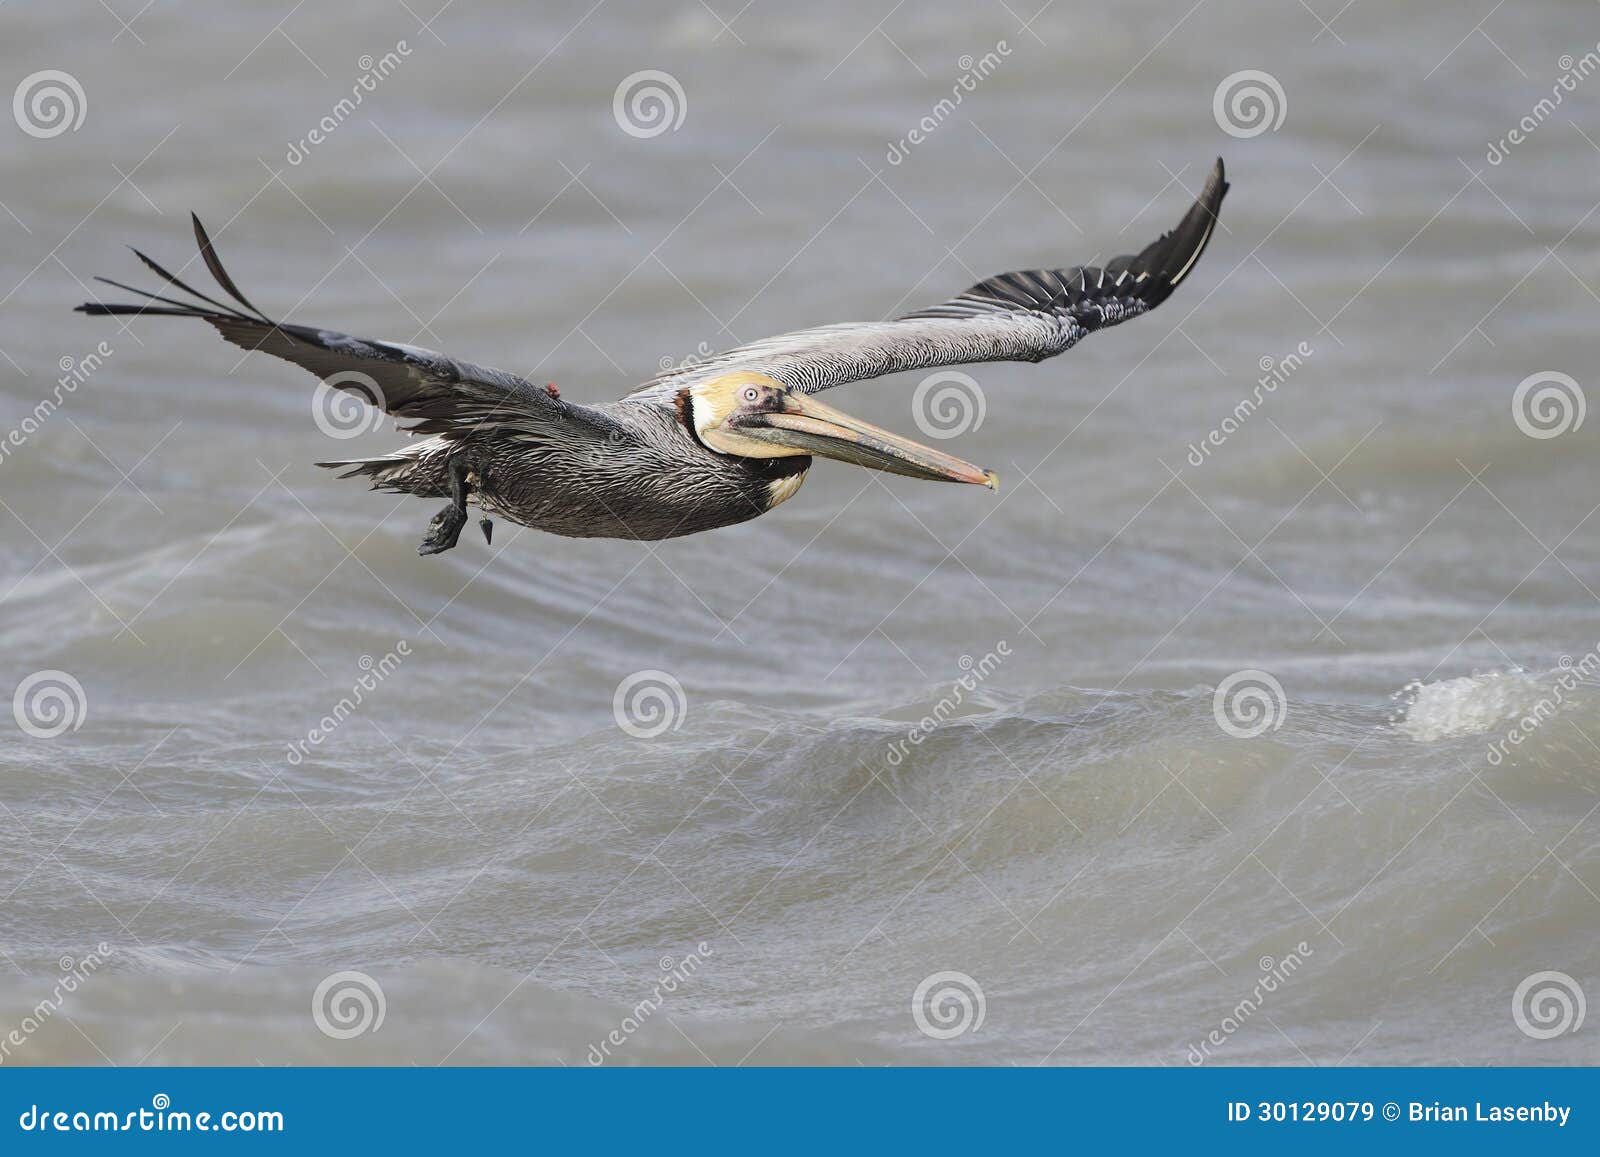 Brown Pelican with a Fishing Line Wrapped Around Its Wing Stock